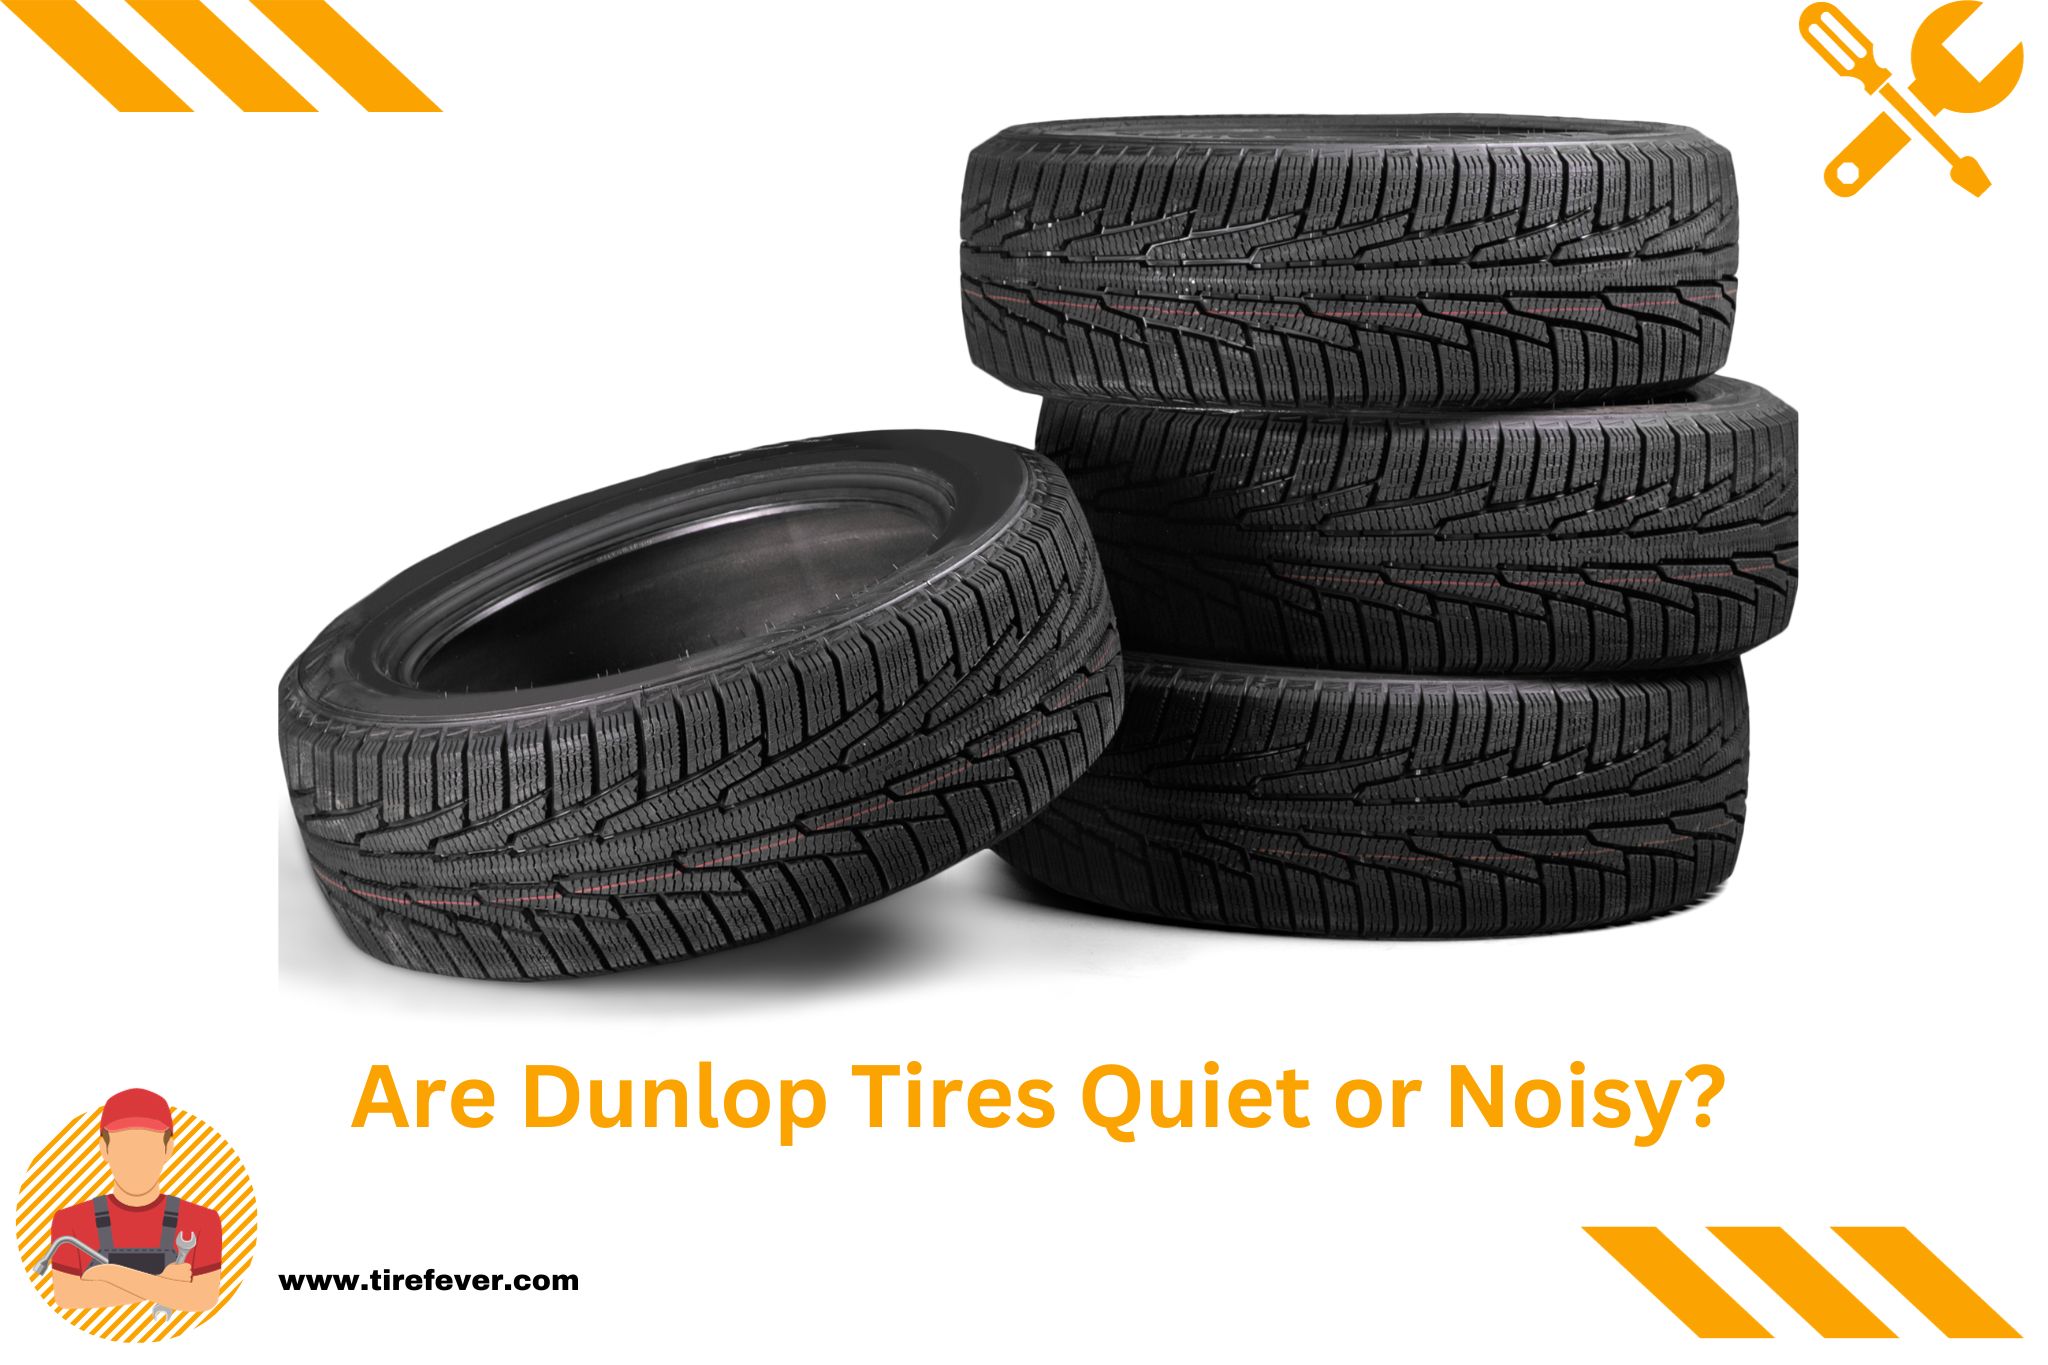 Are Dunlop Tires Quiet or Noisy?